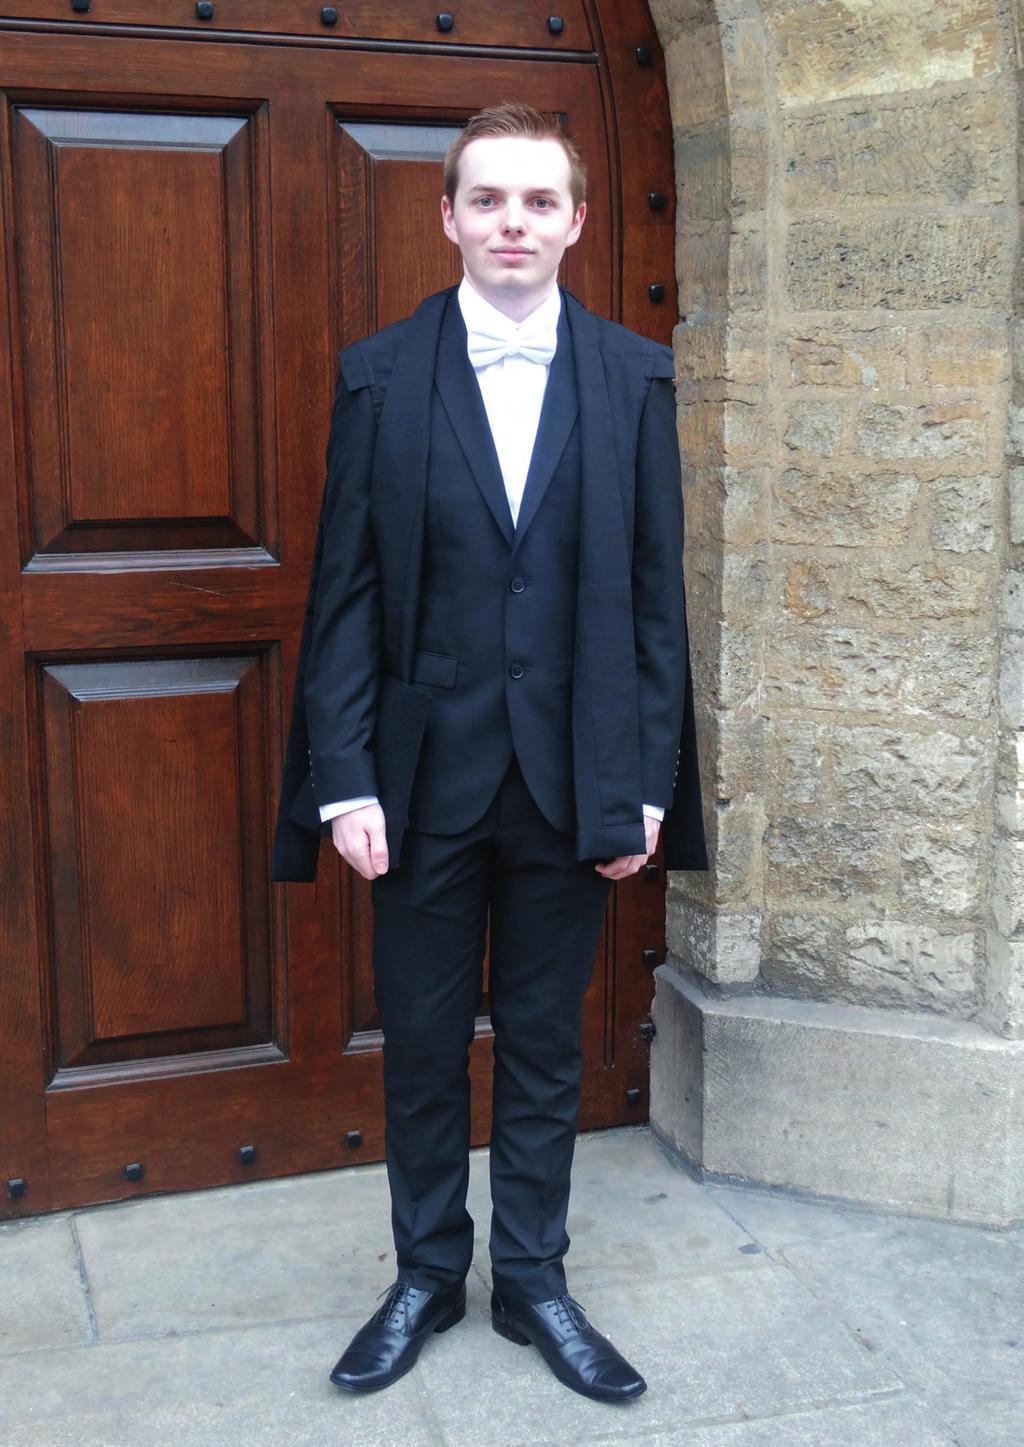 Case Study Tommy Pitcher, former Pingle student. After leaving Sixth Form, Tommy was successful in securing a place at the University of Oxford, where he is currently reading Chemistry.